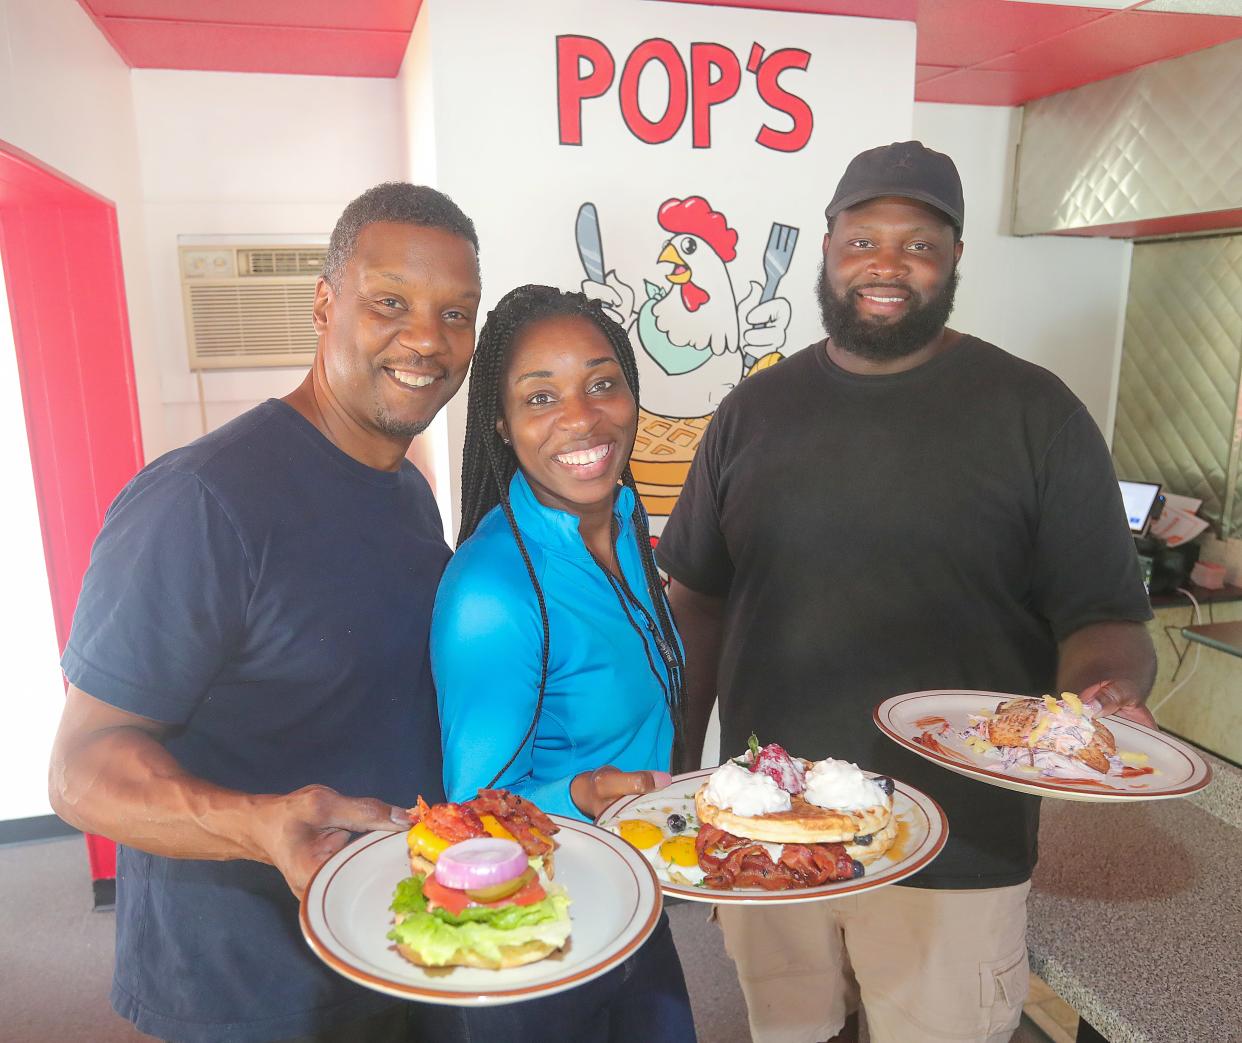 Keith Brewer, left, his wife, Shatanie Brewer, and Amos Coleman opened Pop's Chicken & Waffles in Barberton last week.